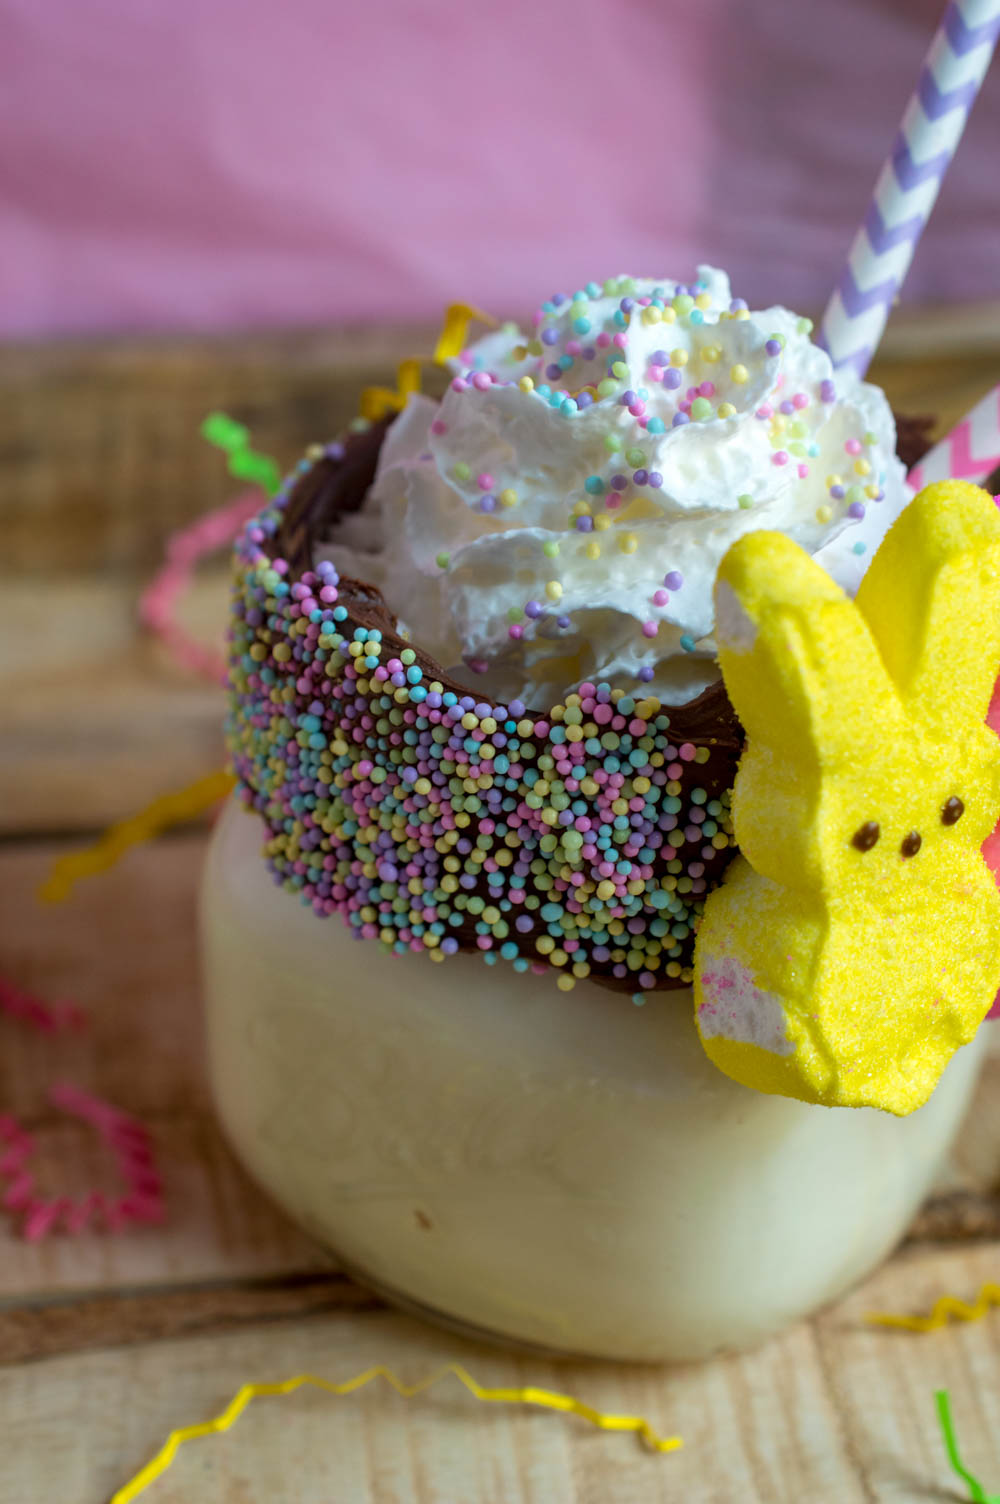 Looking for a delicious Easter treat idea? Try this Easter Milkshake Freakshake and you will wonder why you never thought of it before. This milkshake brings your favorite Easter candies to the milkshake party.